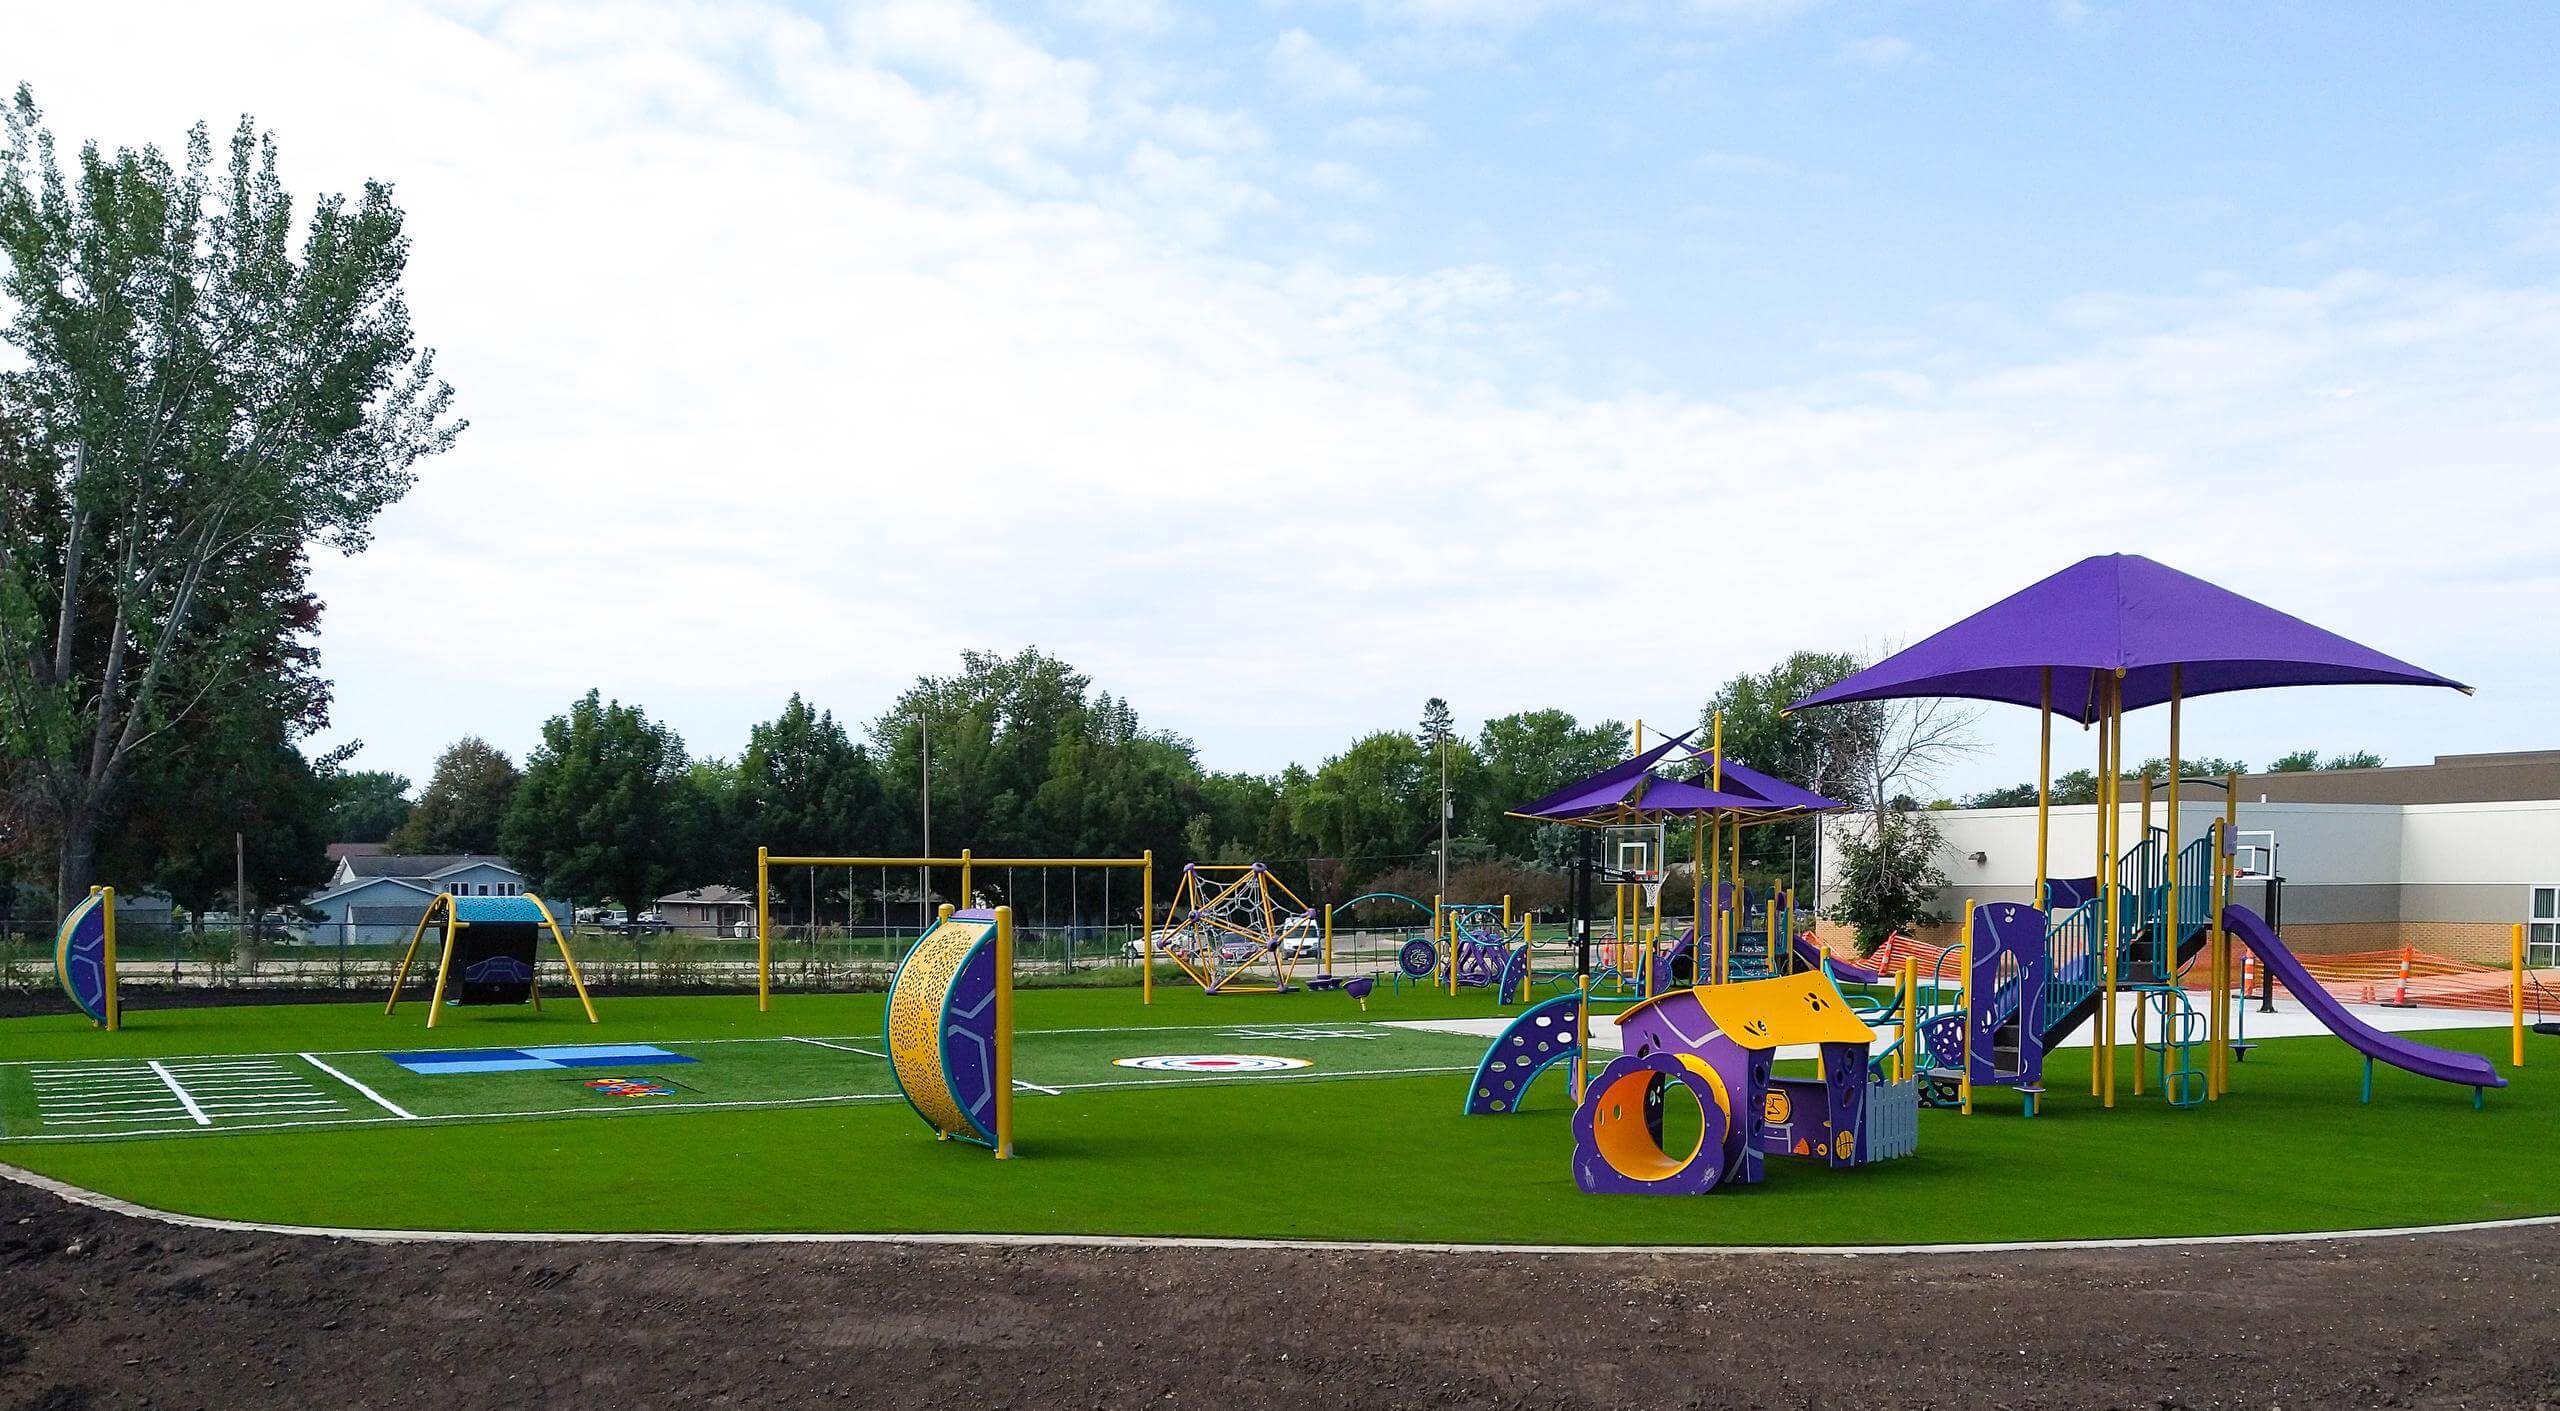 Spacious playground with colorful play structures, shaded areas, and synthetic grass surface.